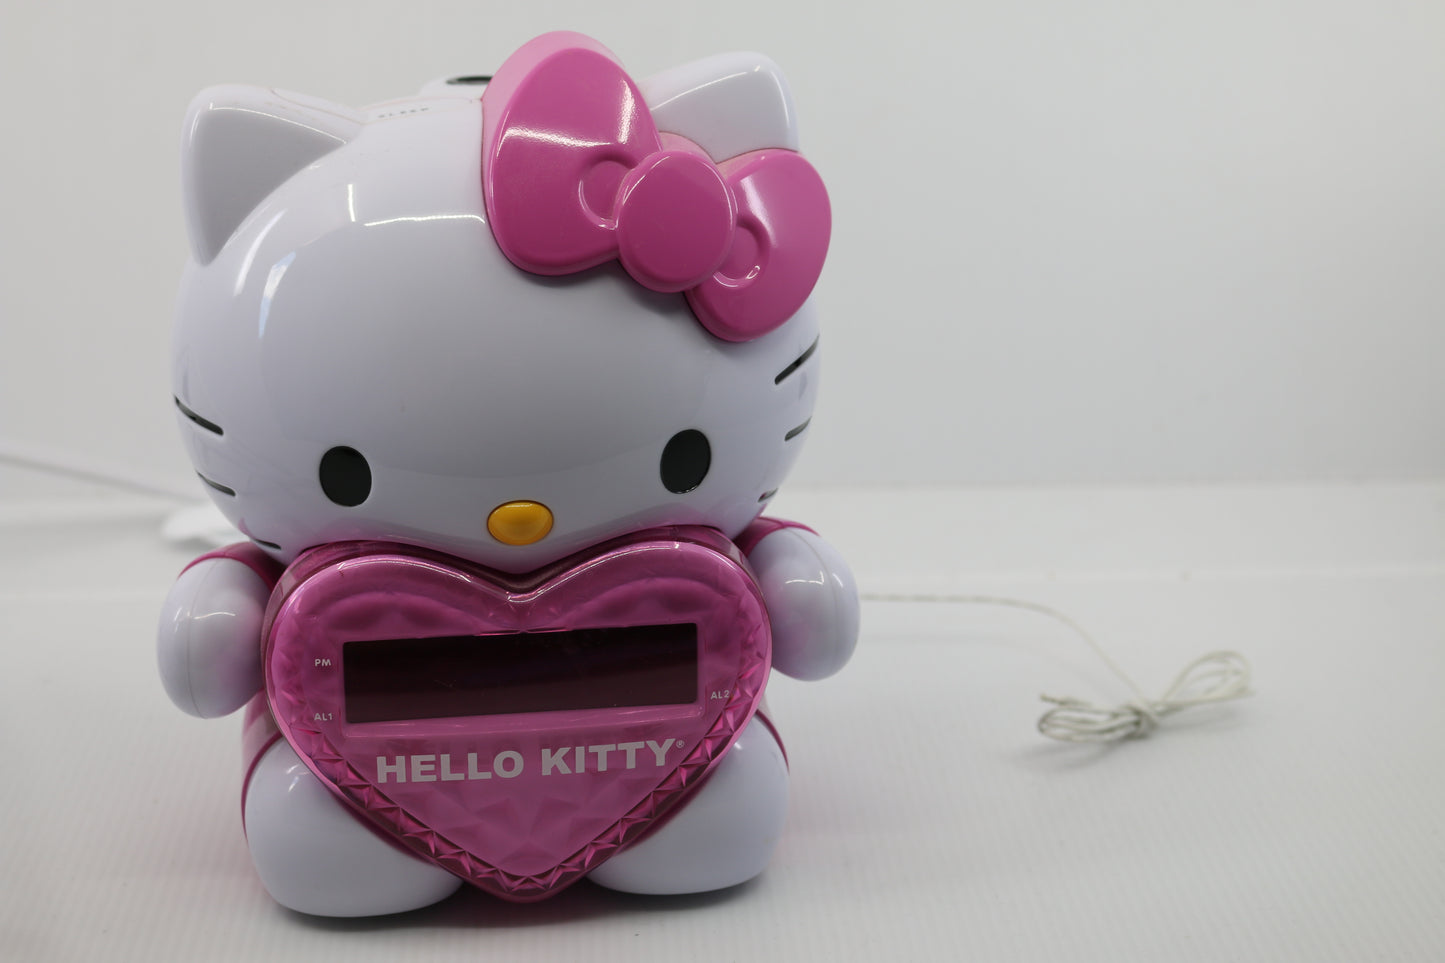 Hello Kitty Projector Alarm Clock AM / FM Radio - KT2064 - Red LED Projection